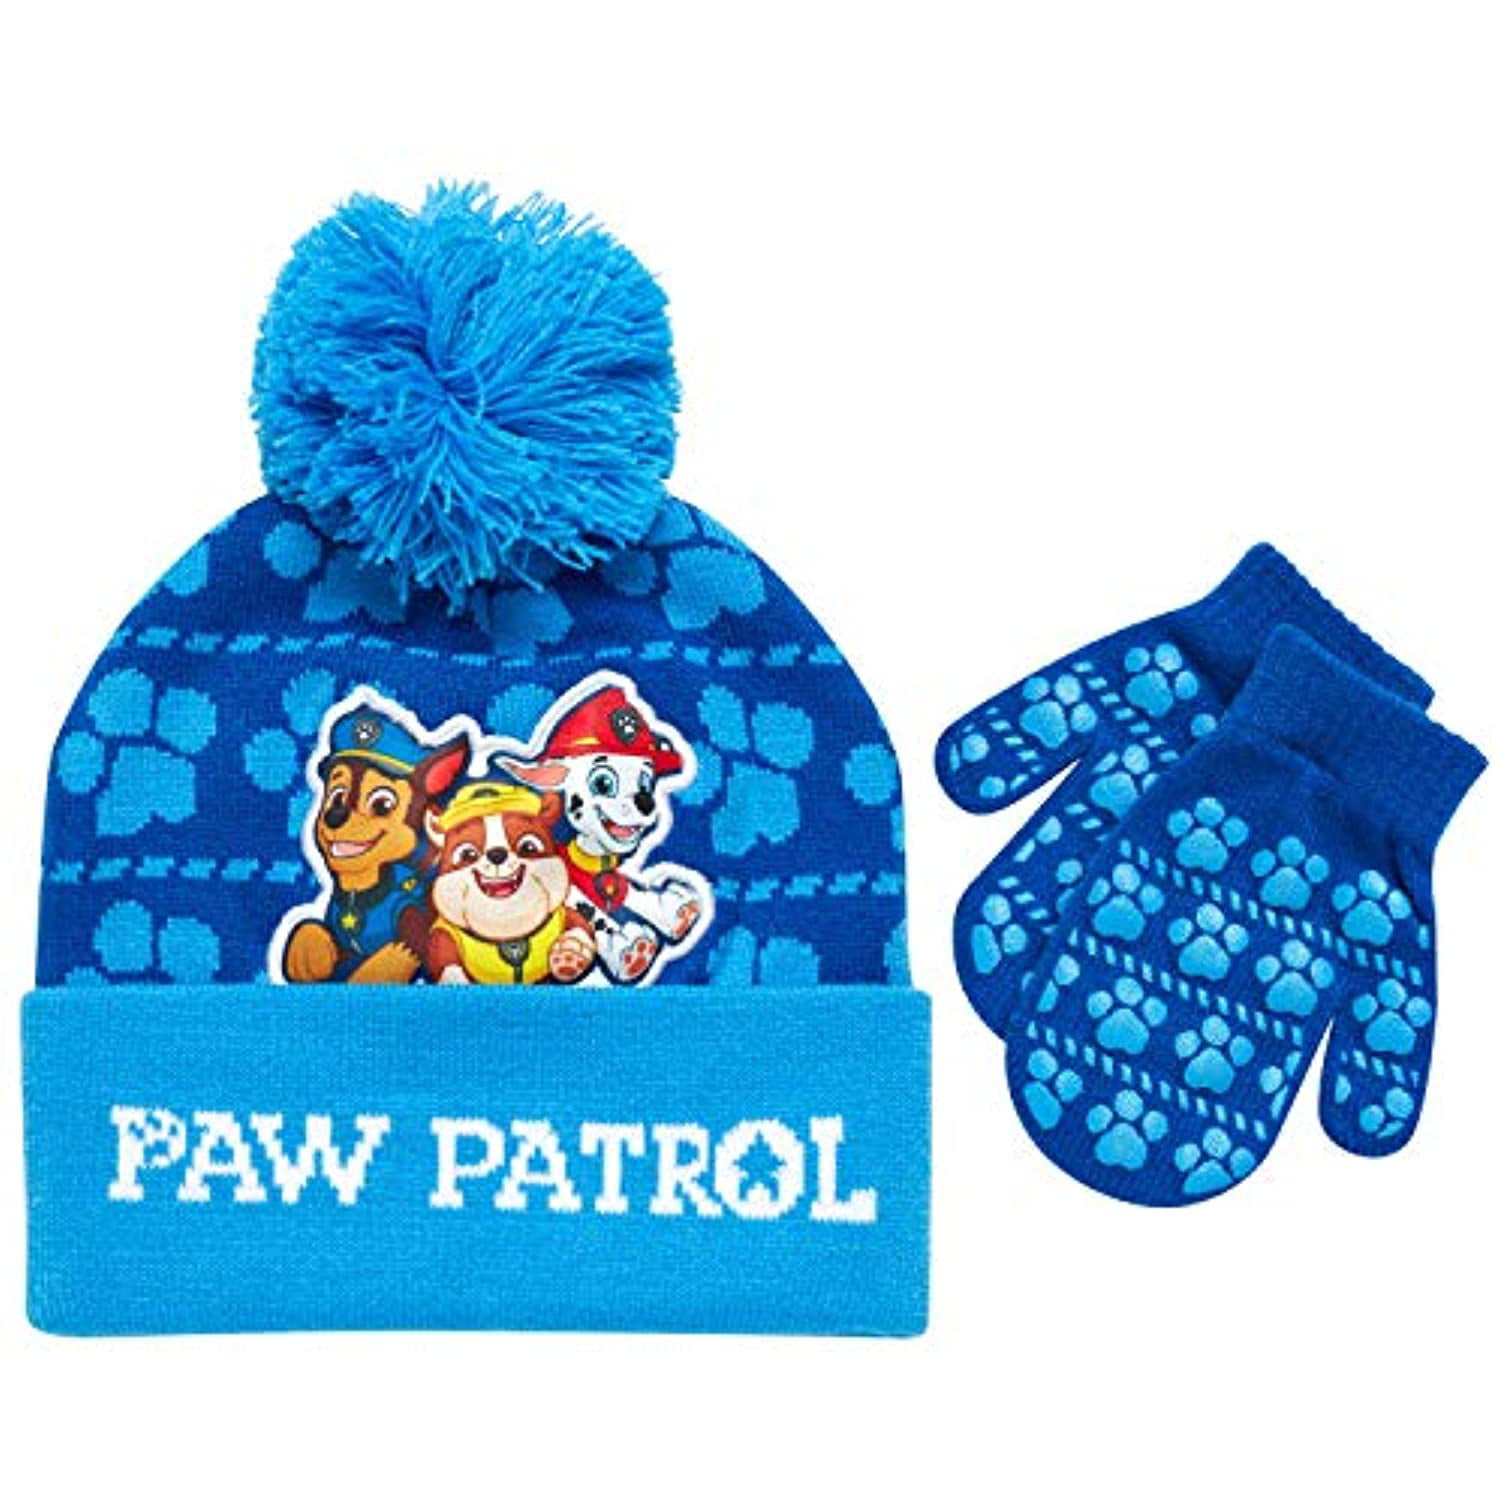 Official Paw Patrol Kids Boys Girls Winter Acrylic Gloves Mittens